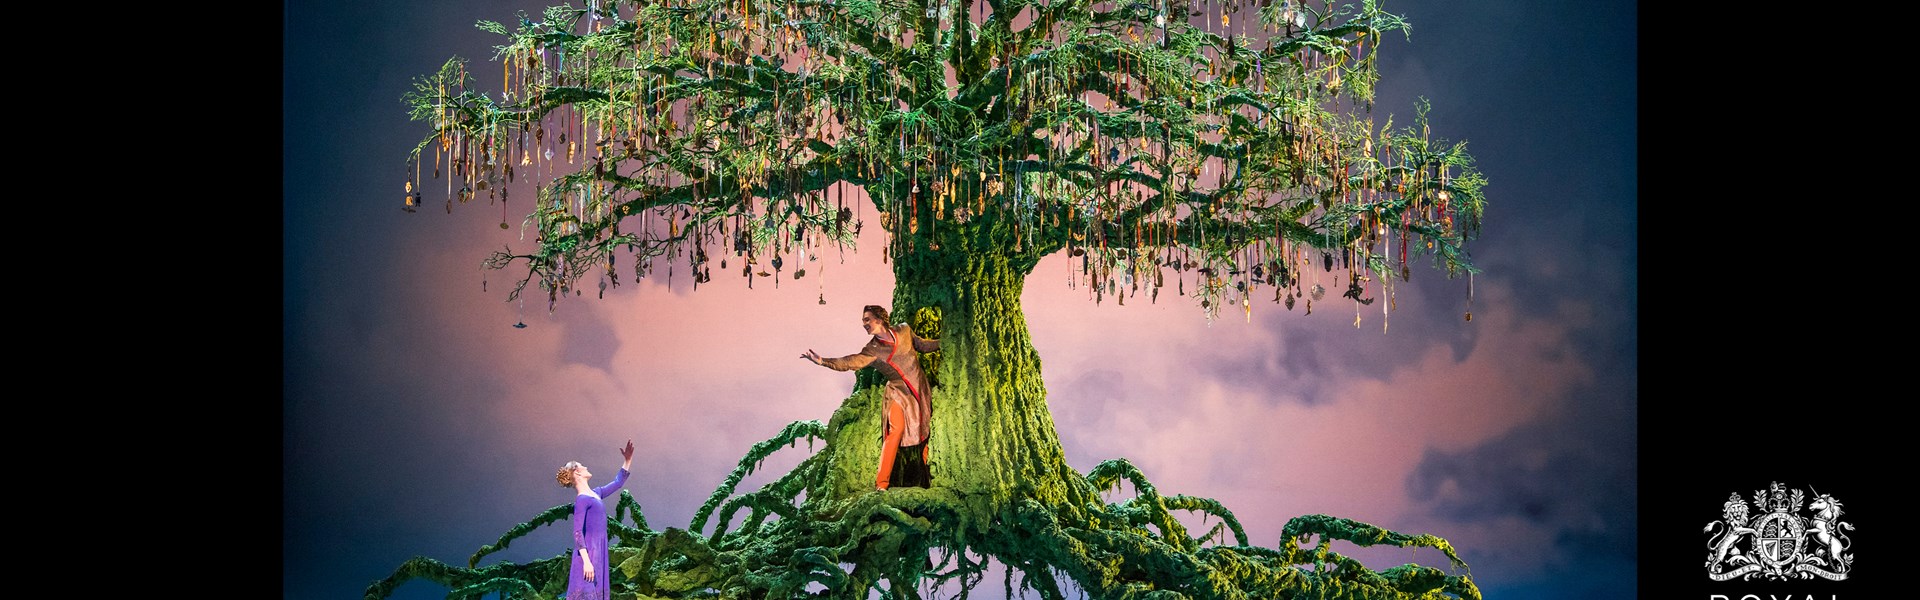 Royal Ballet: The Winter's Tale (Live Screening)